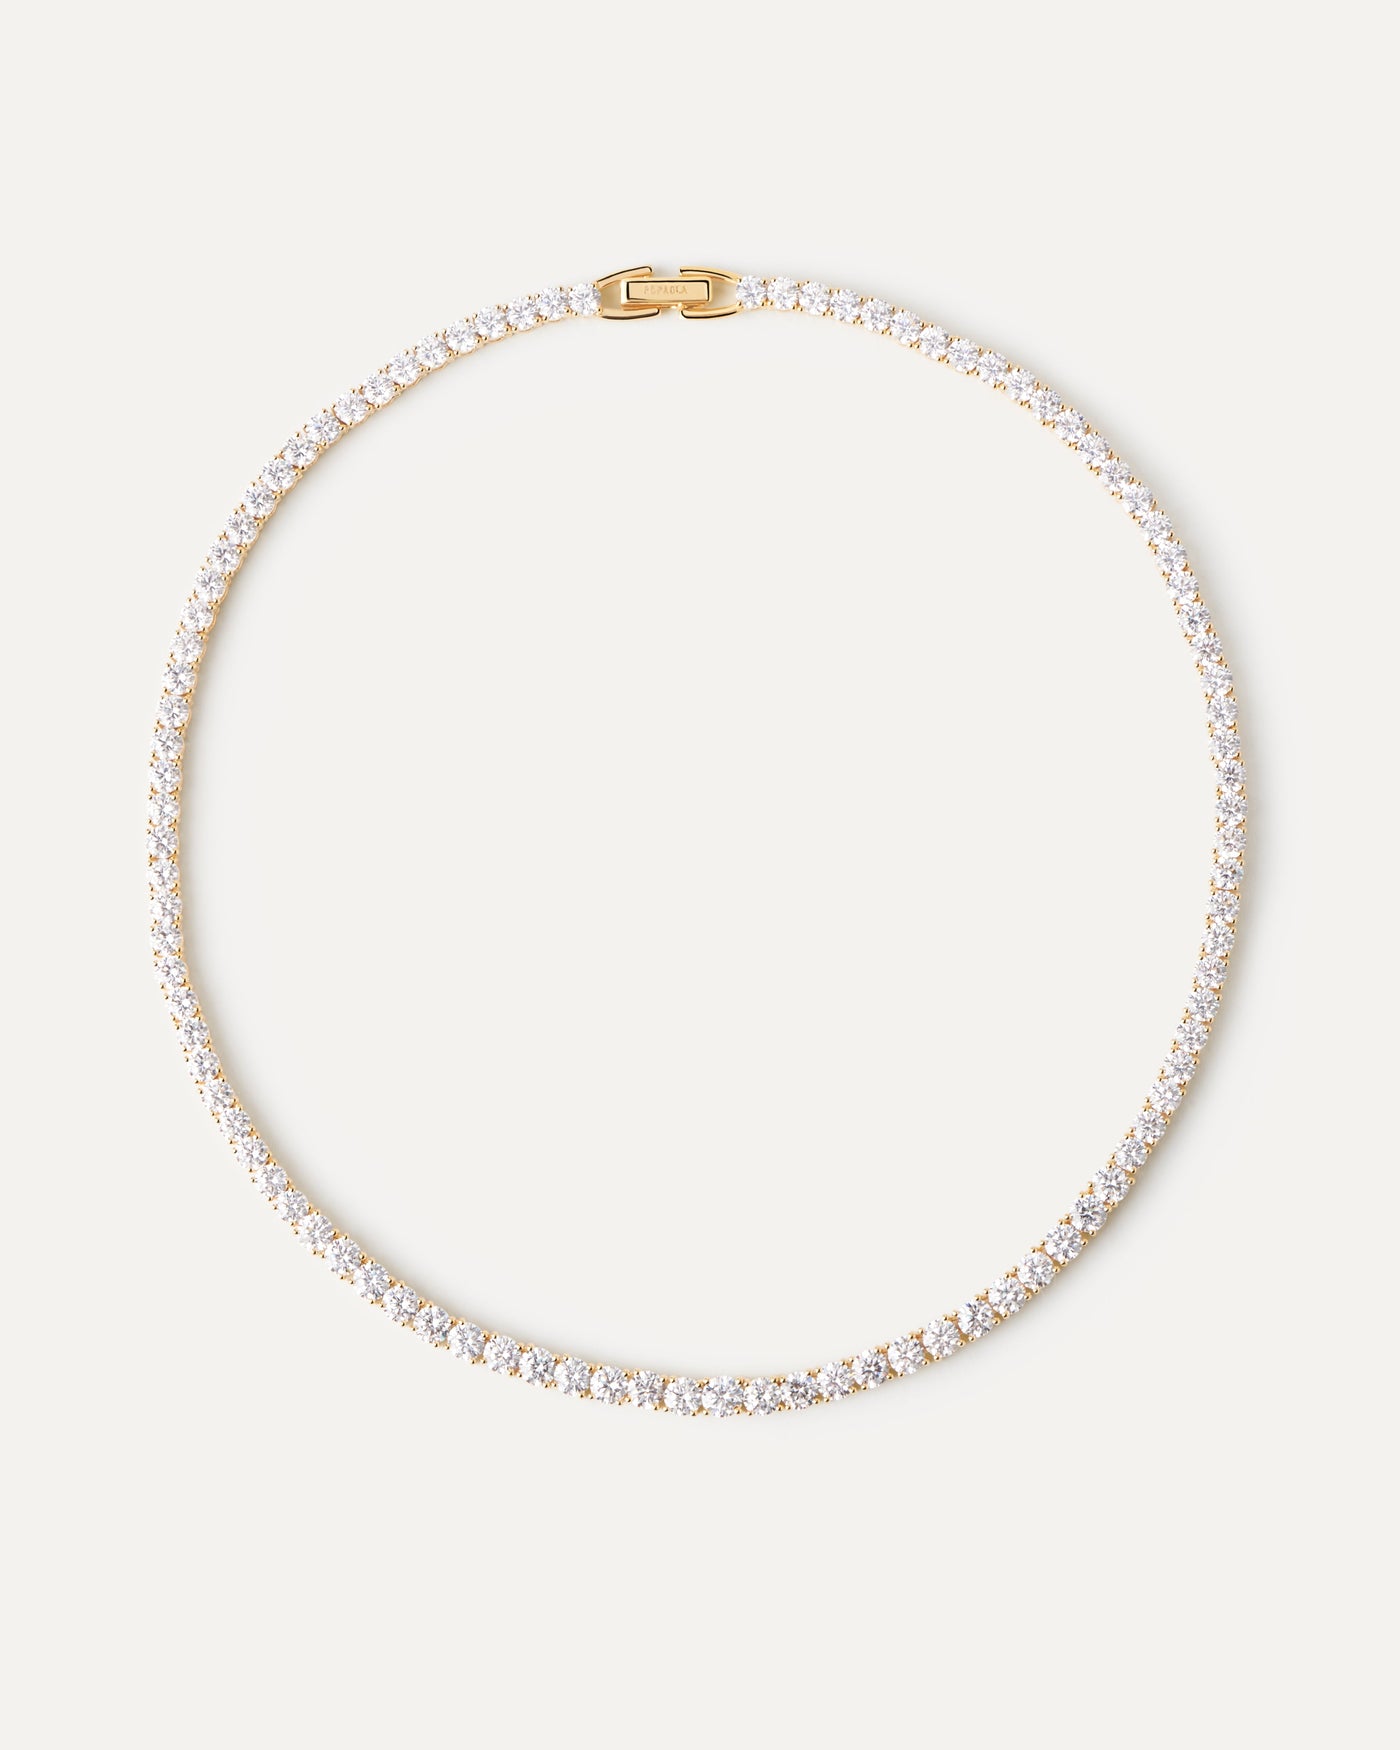 2023 Selection | Tennis Supreme Necklace. Gold-plated silver chain necklace with tennis link and white zirconia. Get the latest arrival from PDPAOLA. Place your order safely and get this Best Seller. Free Shipping.